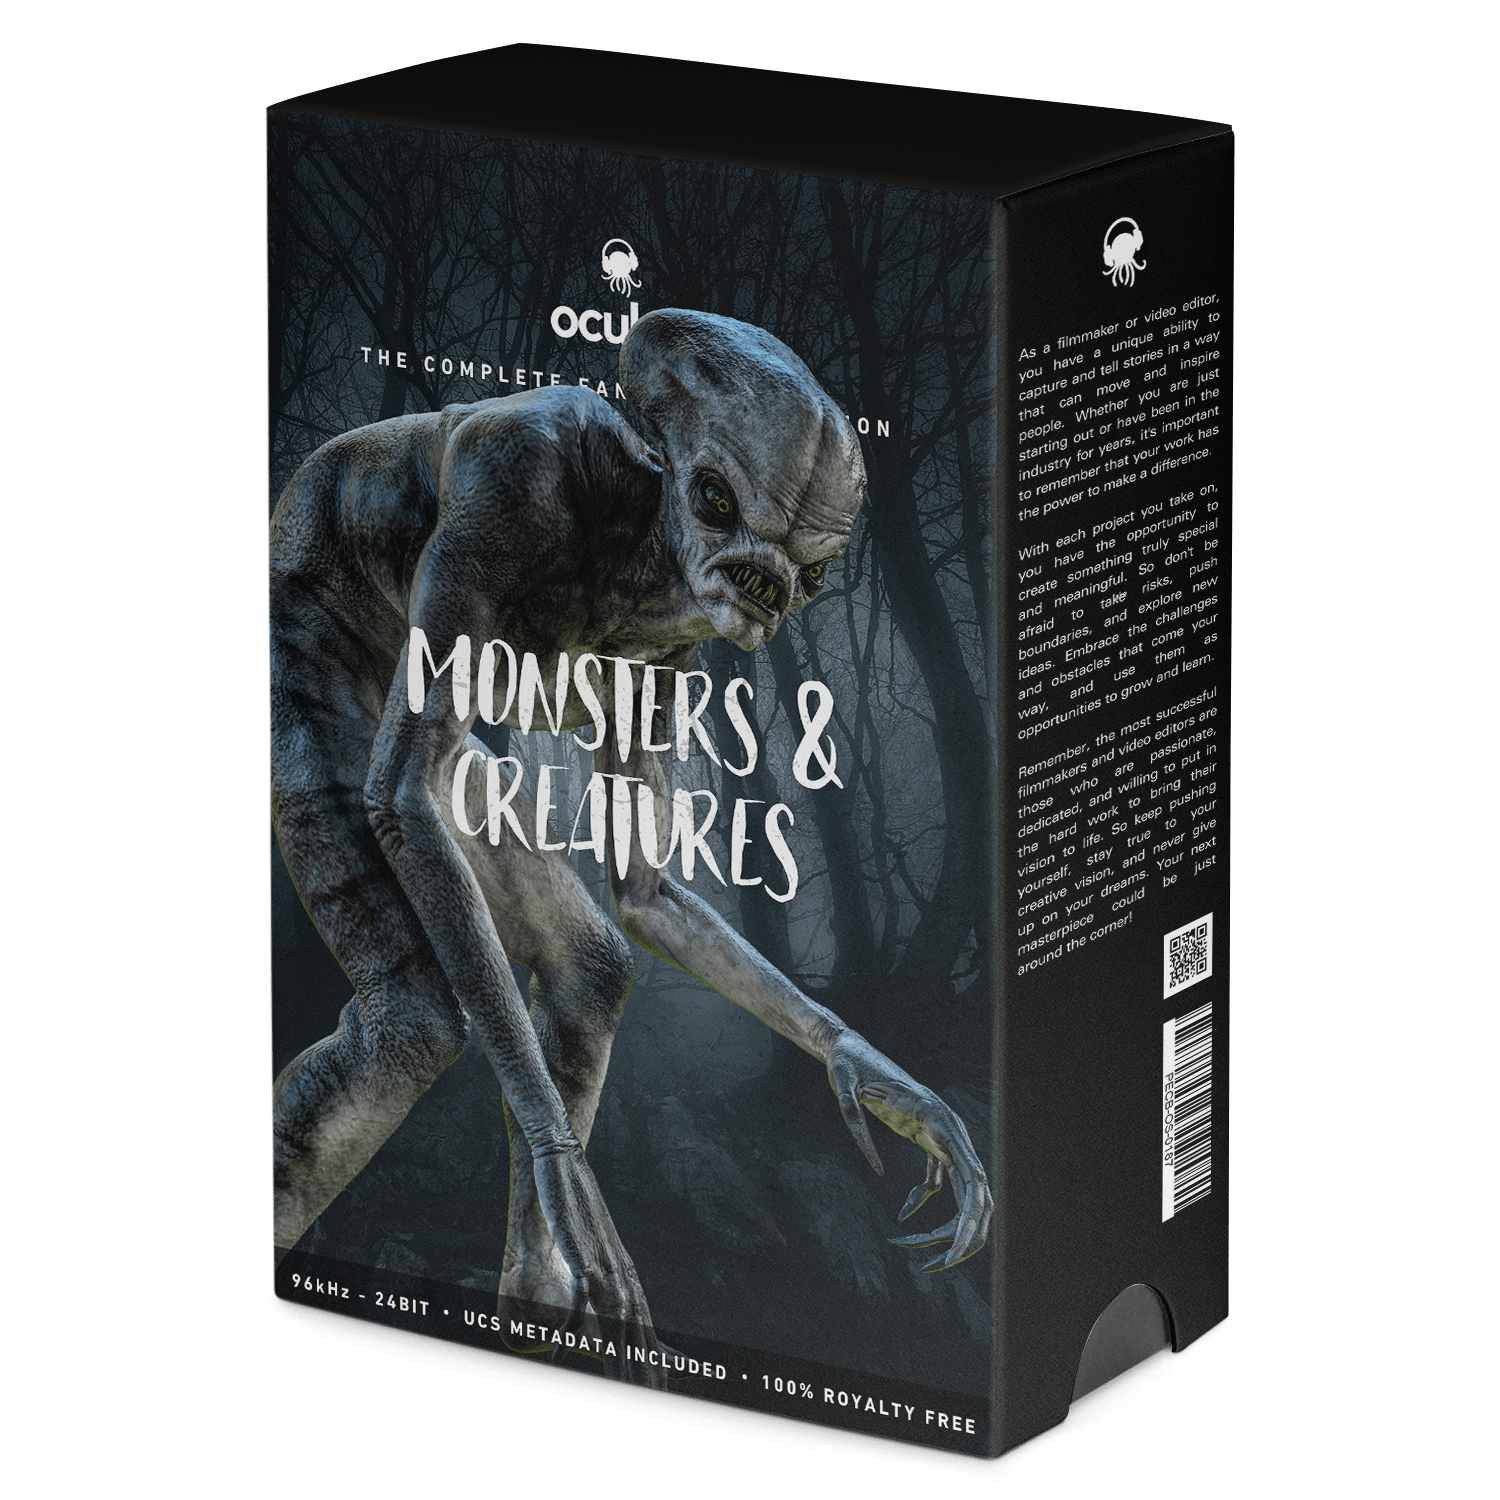 Monsters & Creatures Sound FX for Video Editing. Fantasy Sound Effects Library.